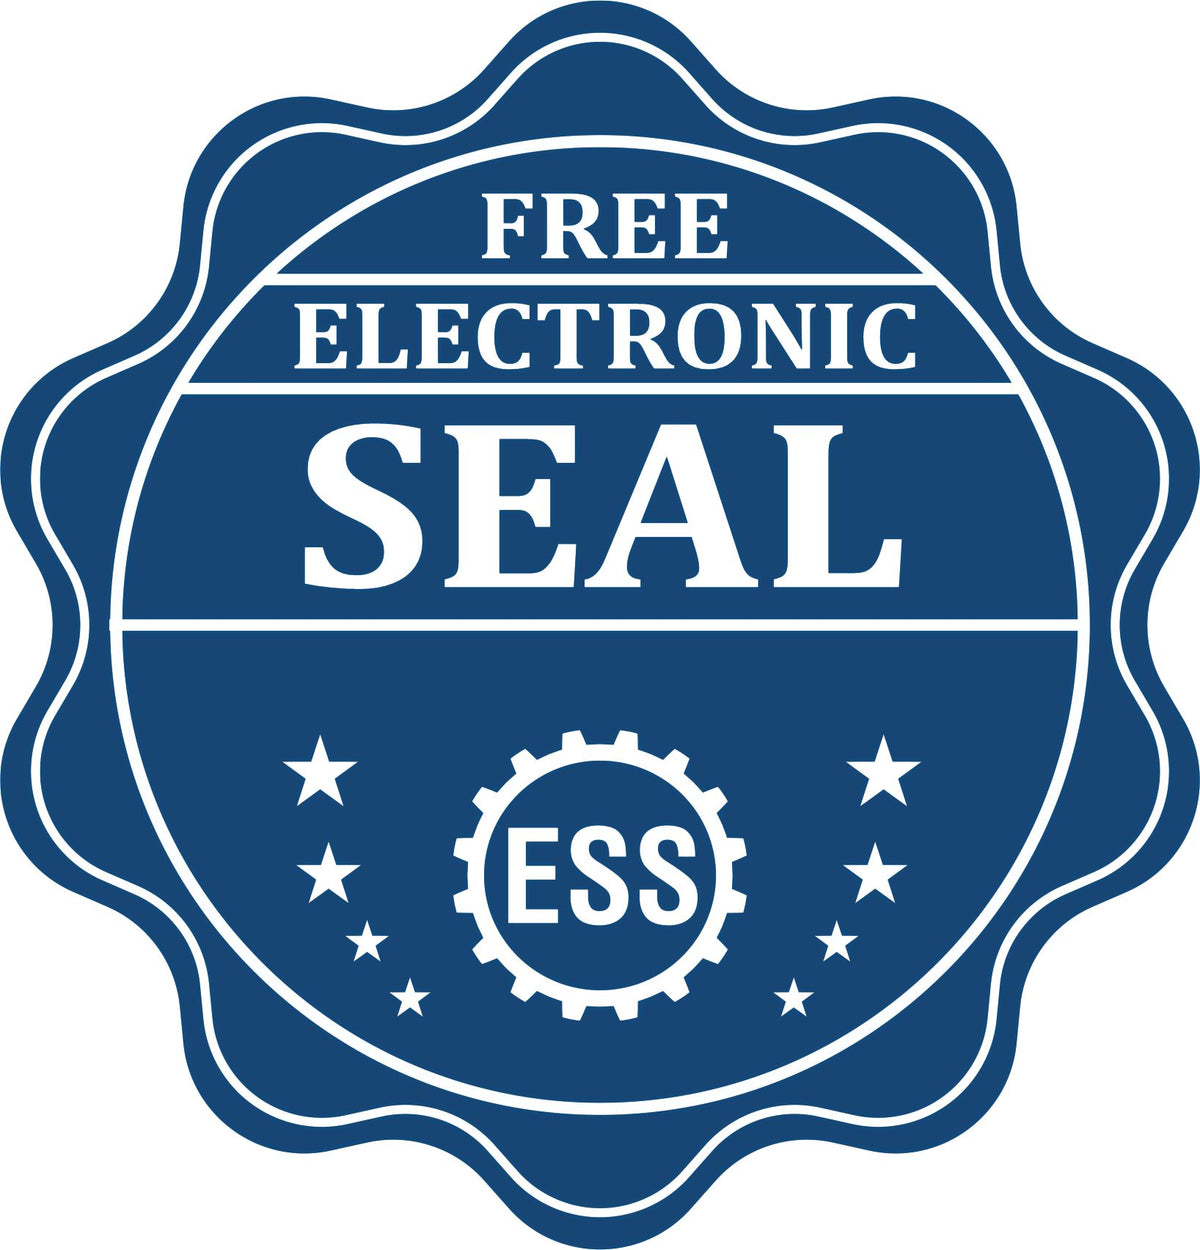 A badge showing a free electronic seal for the Premium MaxLight Pre-Inked Massachusetts Engineering Stamp with stars and the ESS gear on the emblem.